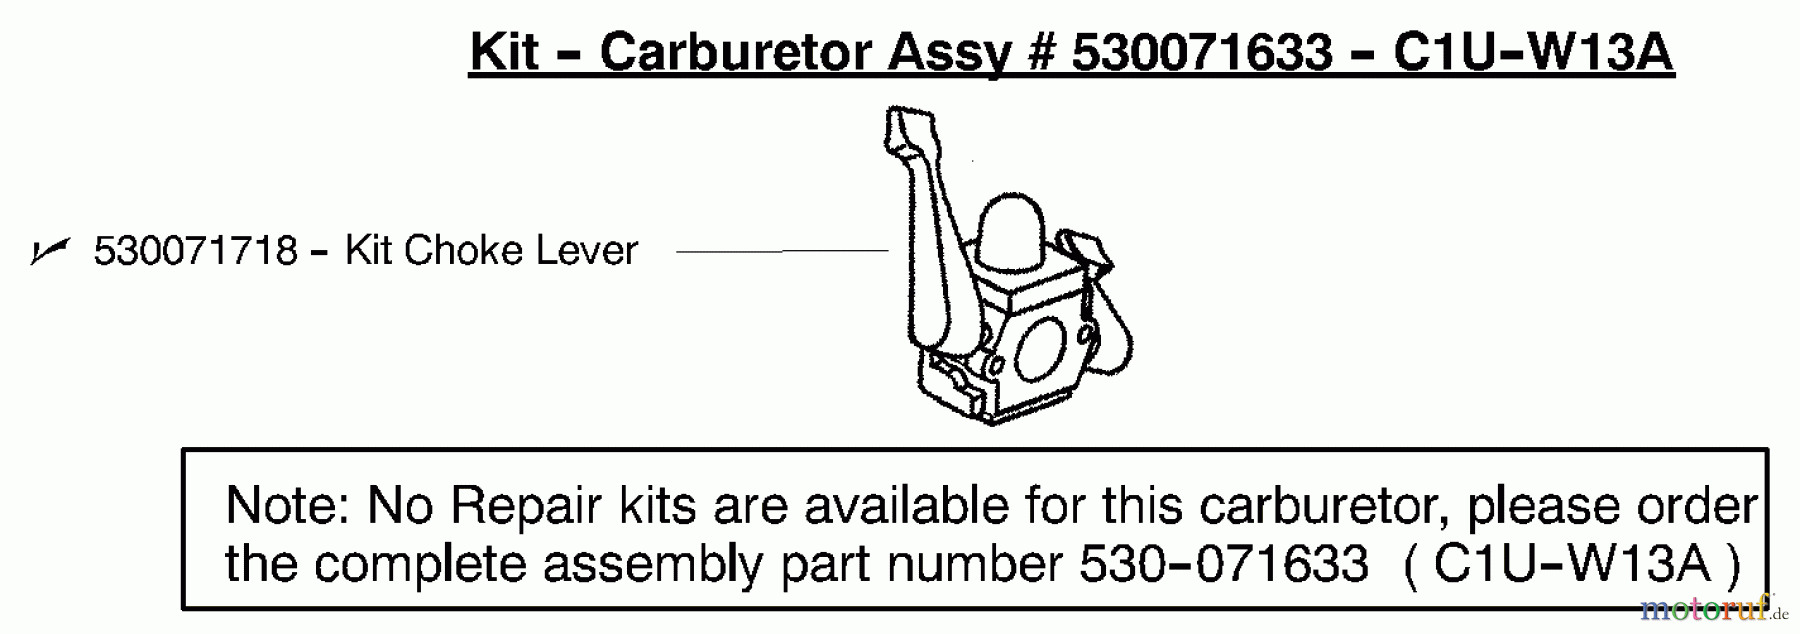  Poulan / Weed Eater Heckenscheren GHT180LE (Type 1) - Weed Eater Hedge Trimmer Carburetor Assembly (C1U-W13A) PN 530071633